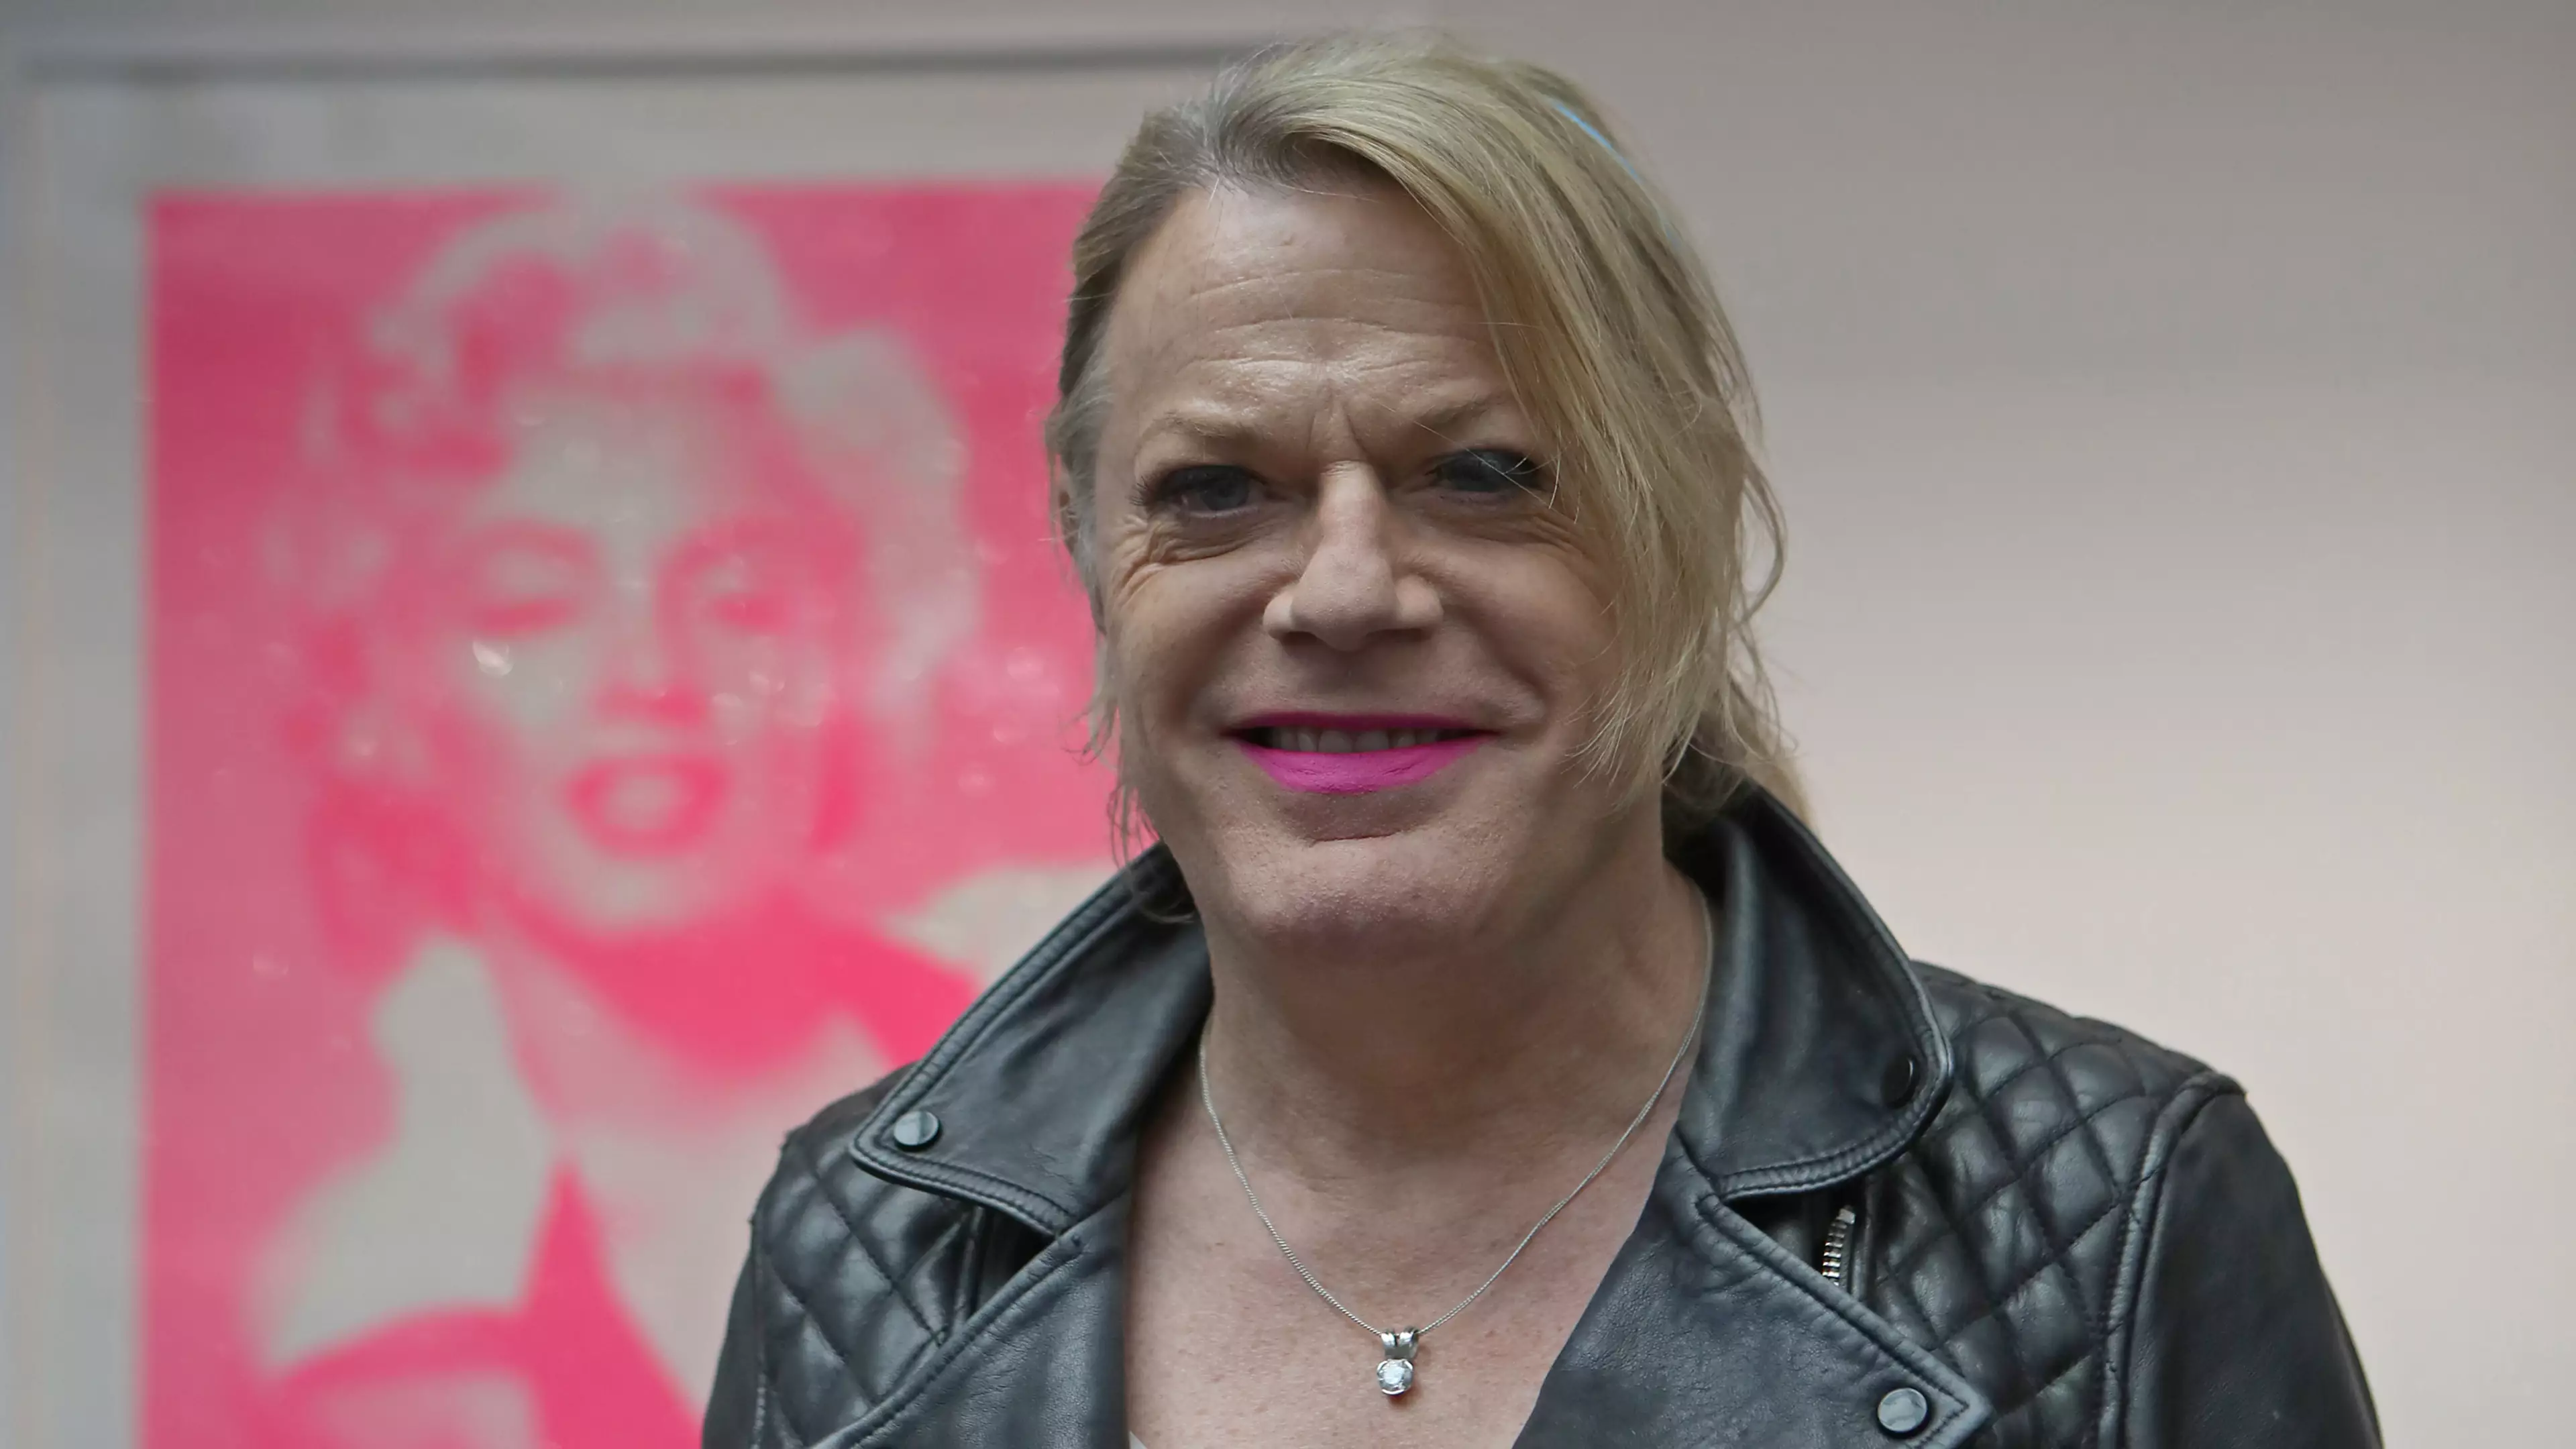 Eddie Izzard Praised After Asking To Be Referred To As 'She' On TV Programme